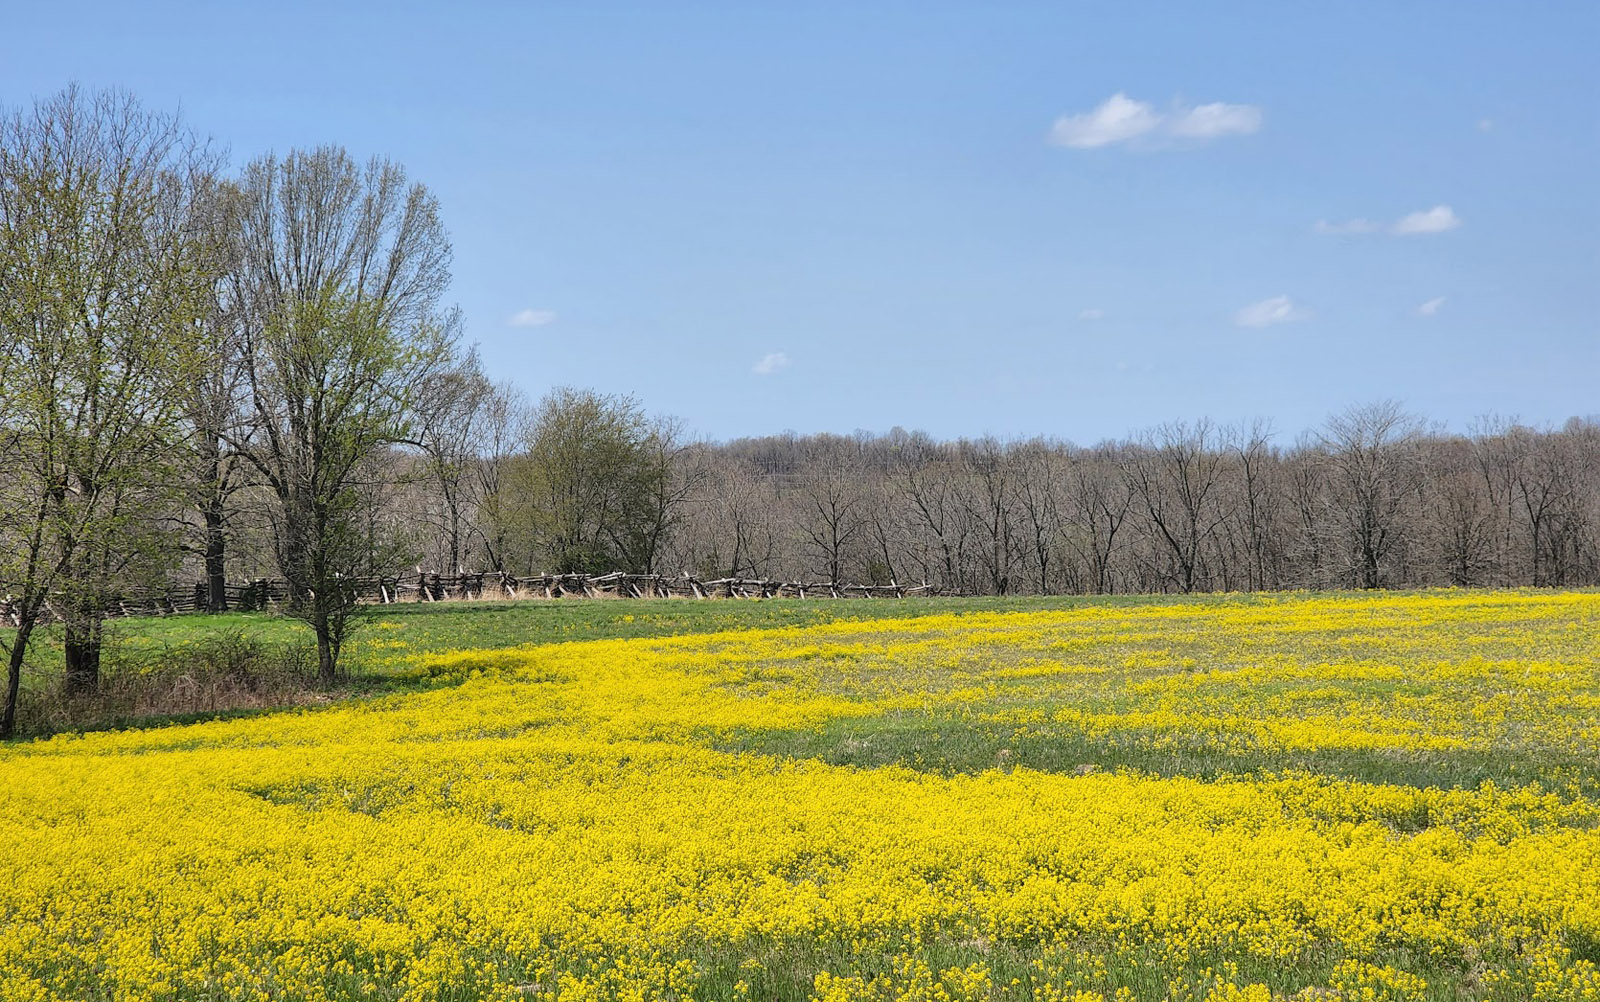 Spring in the Ozarks turns landscapes from brown to green — and brings threat of severe weather